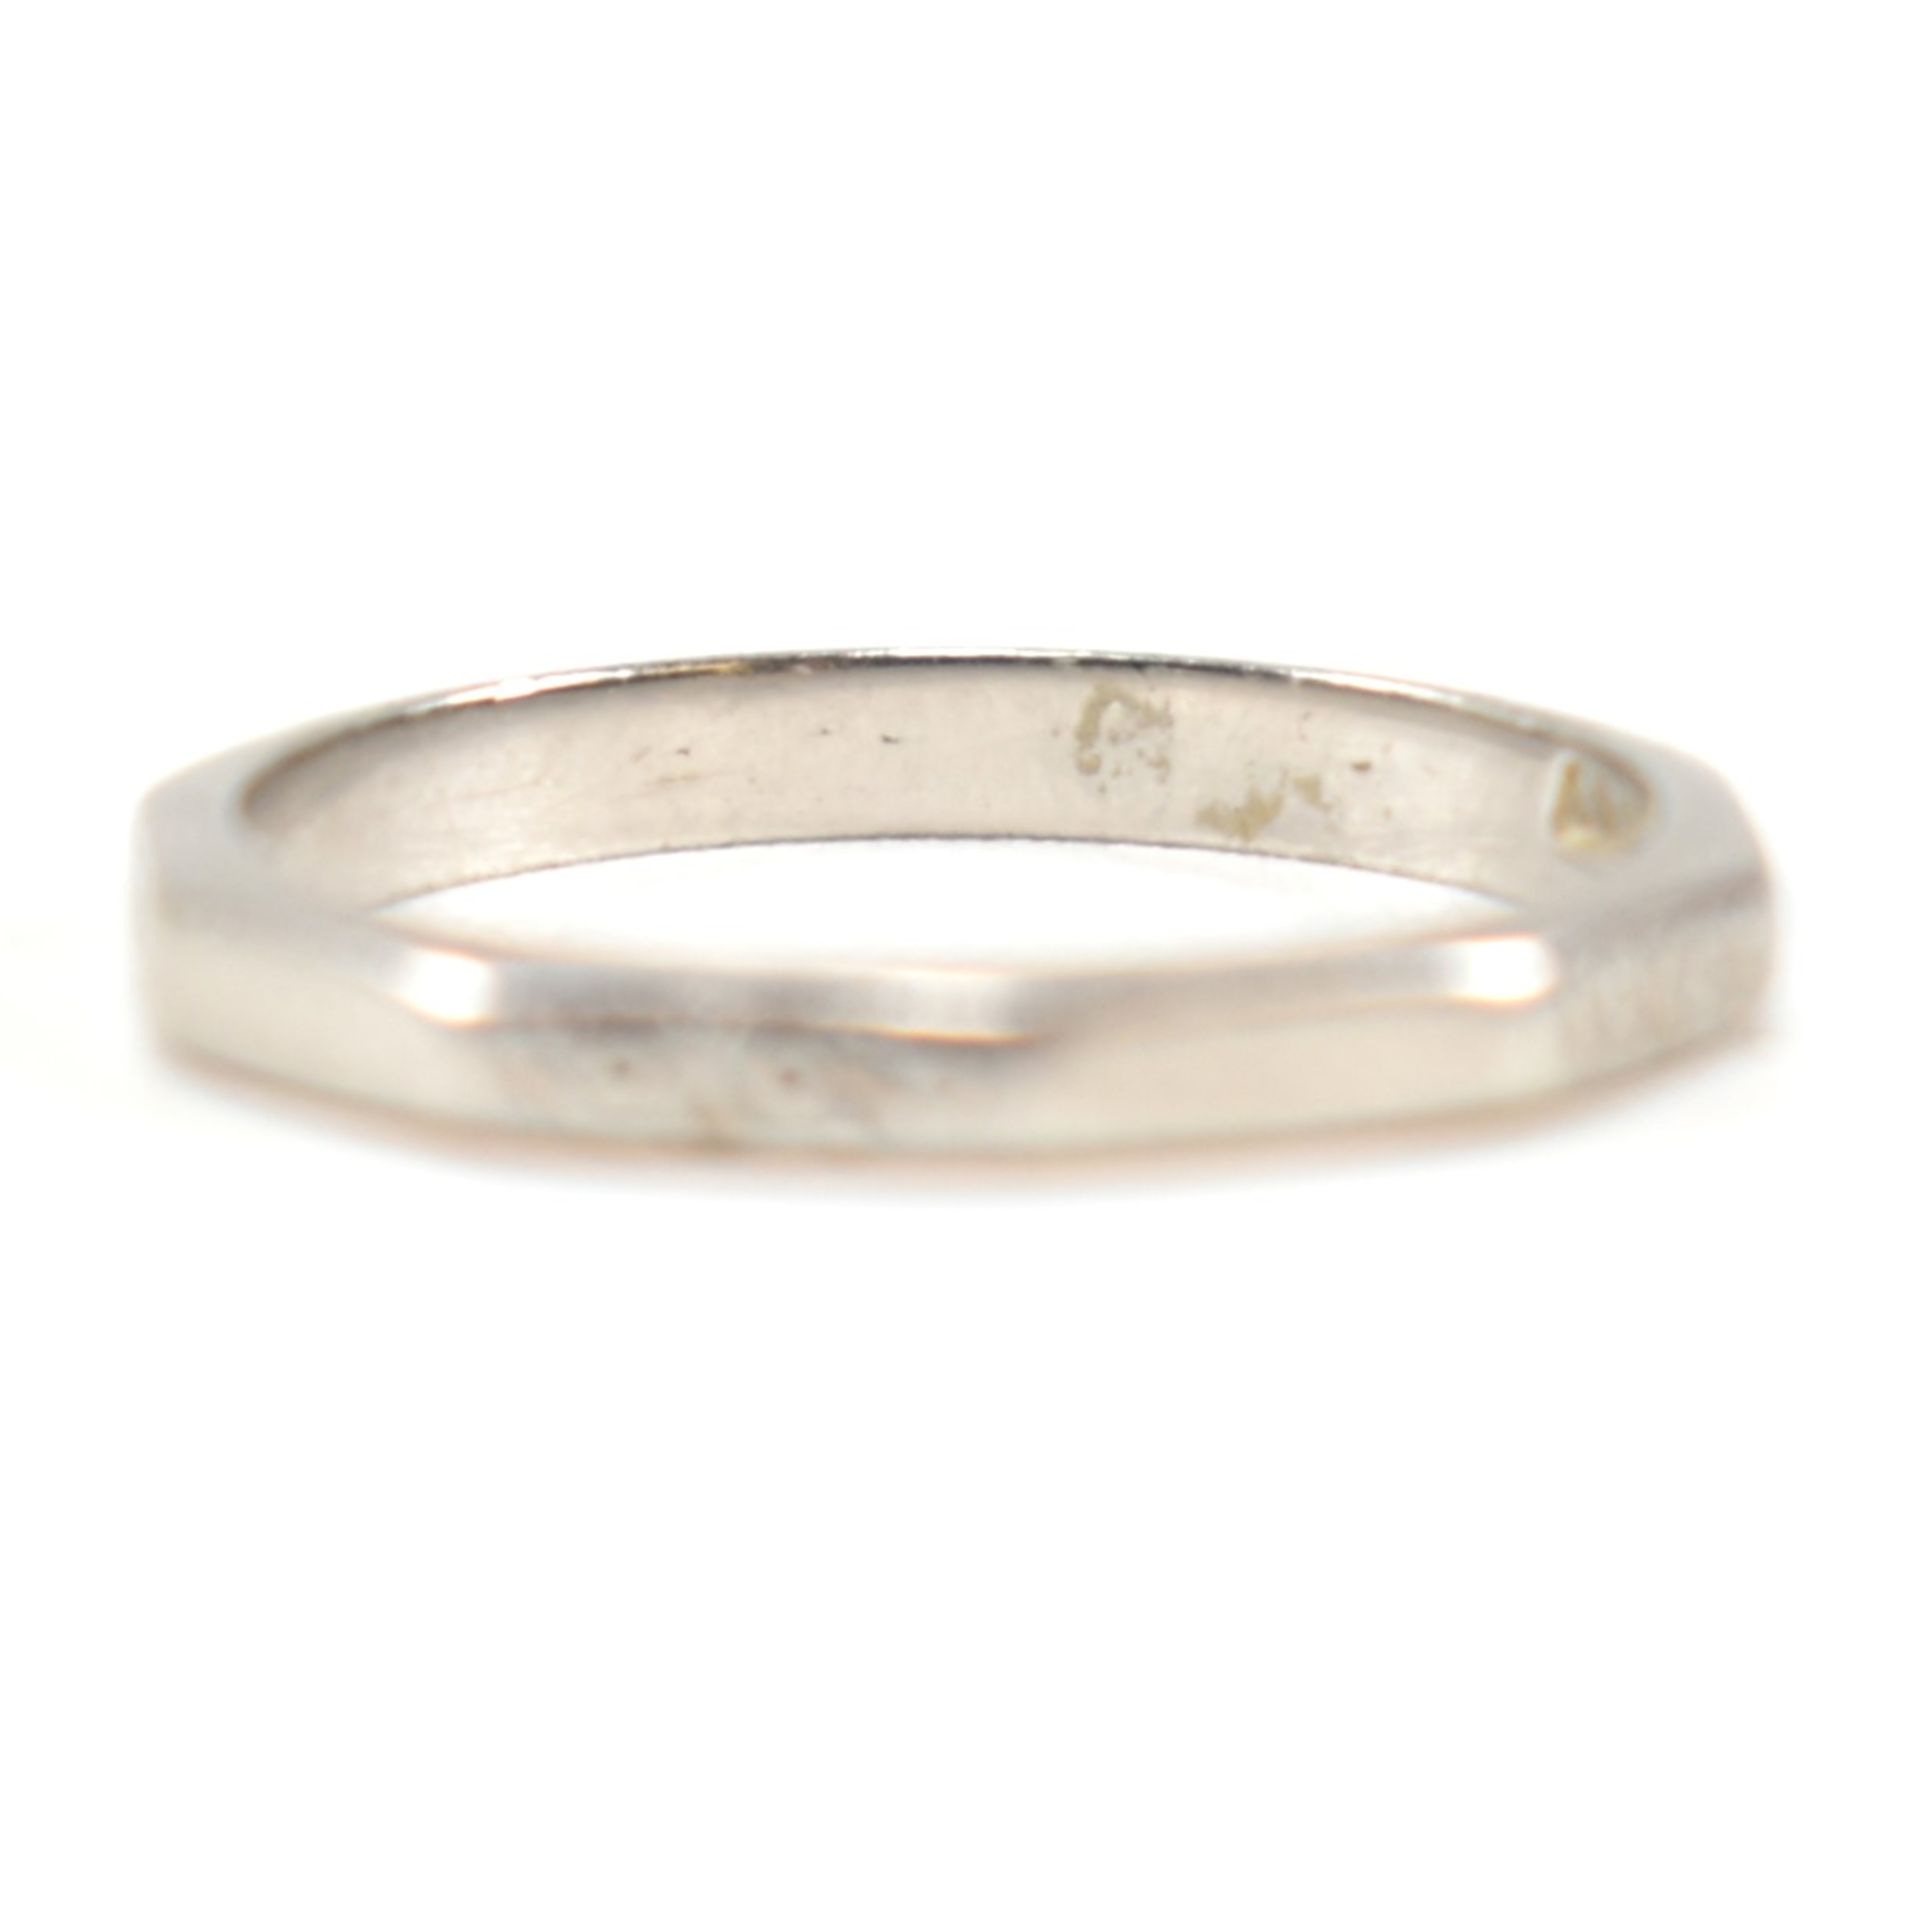 PLATINUM FACETED BAND RING - Image 3 of 5